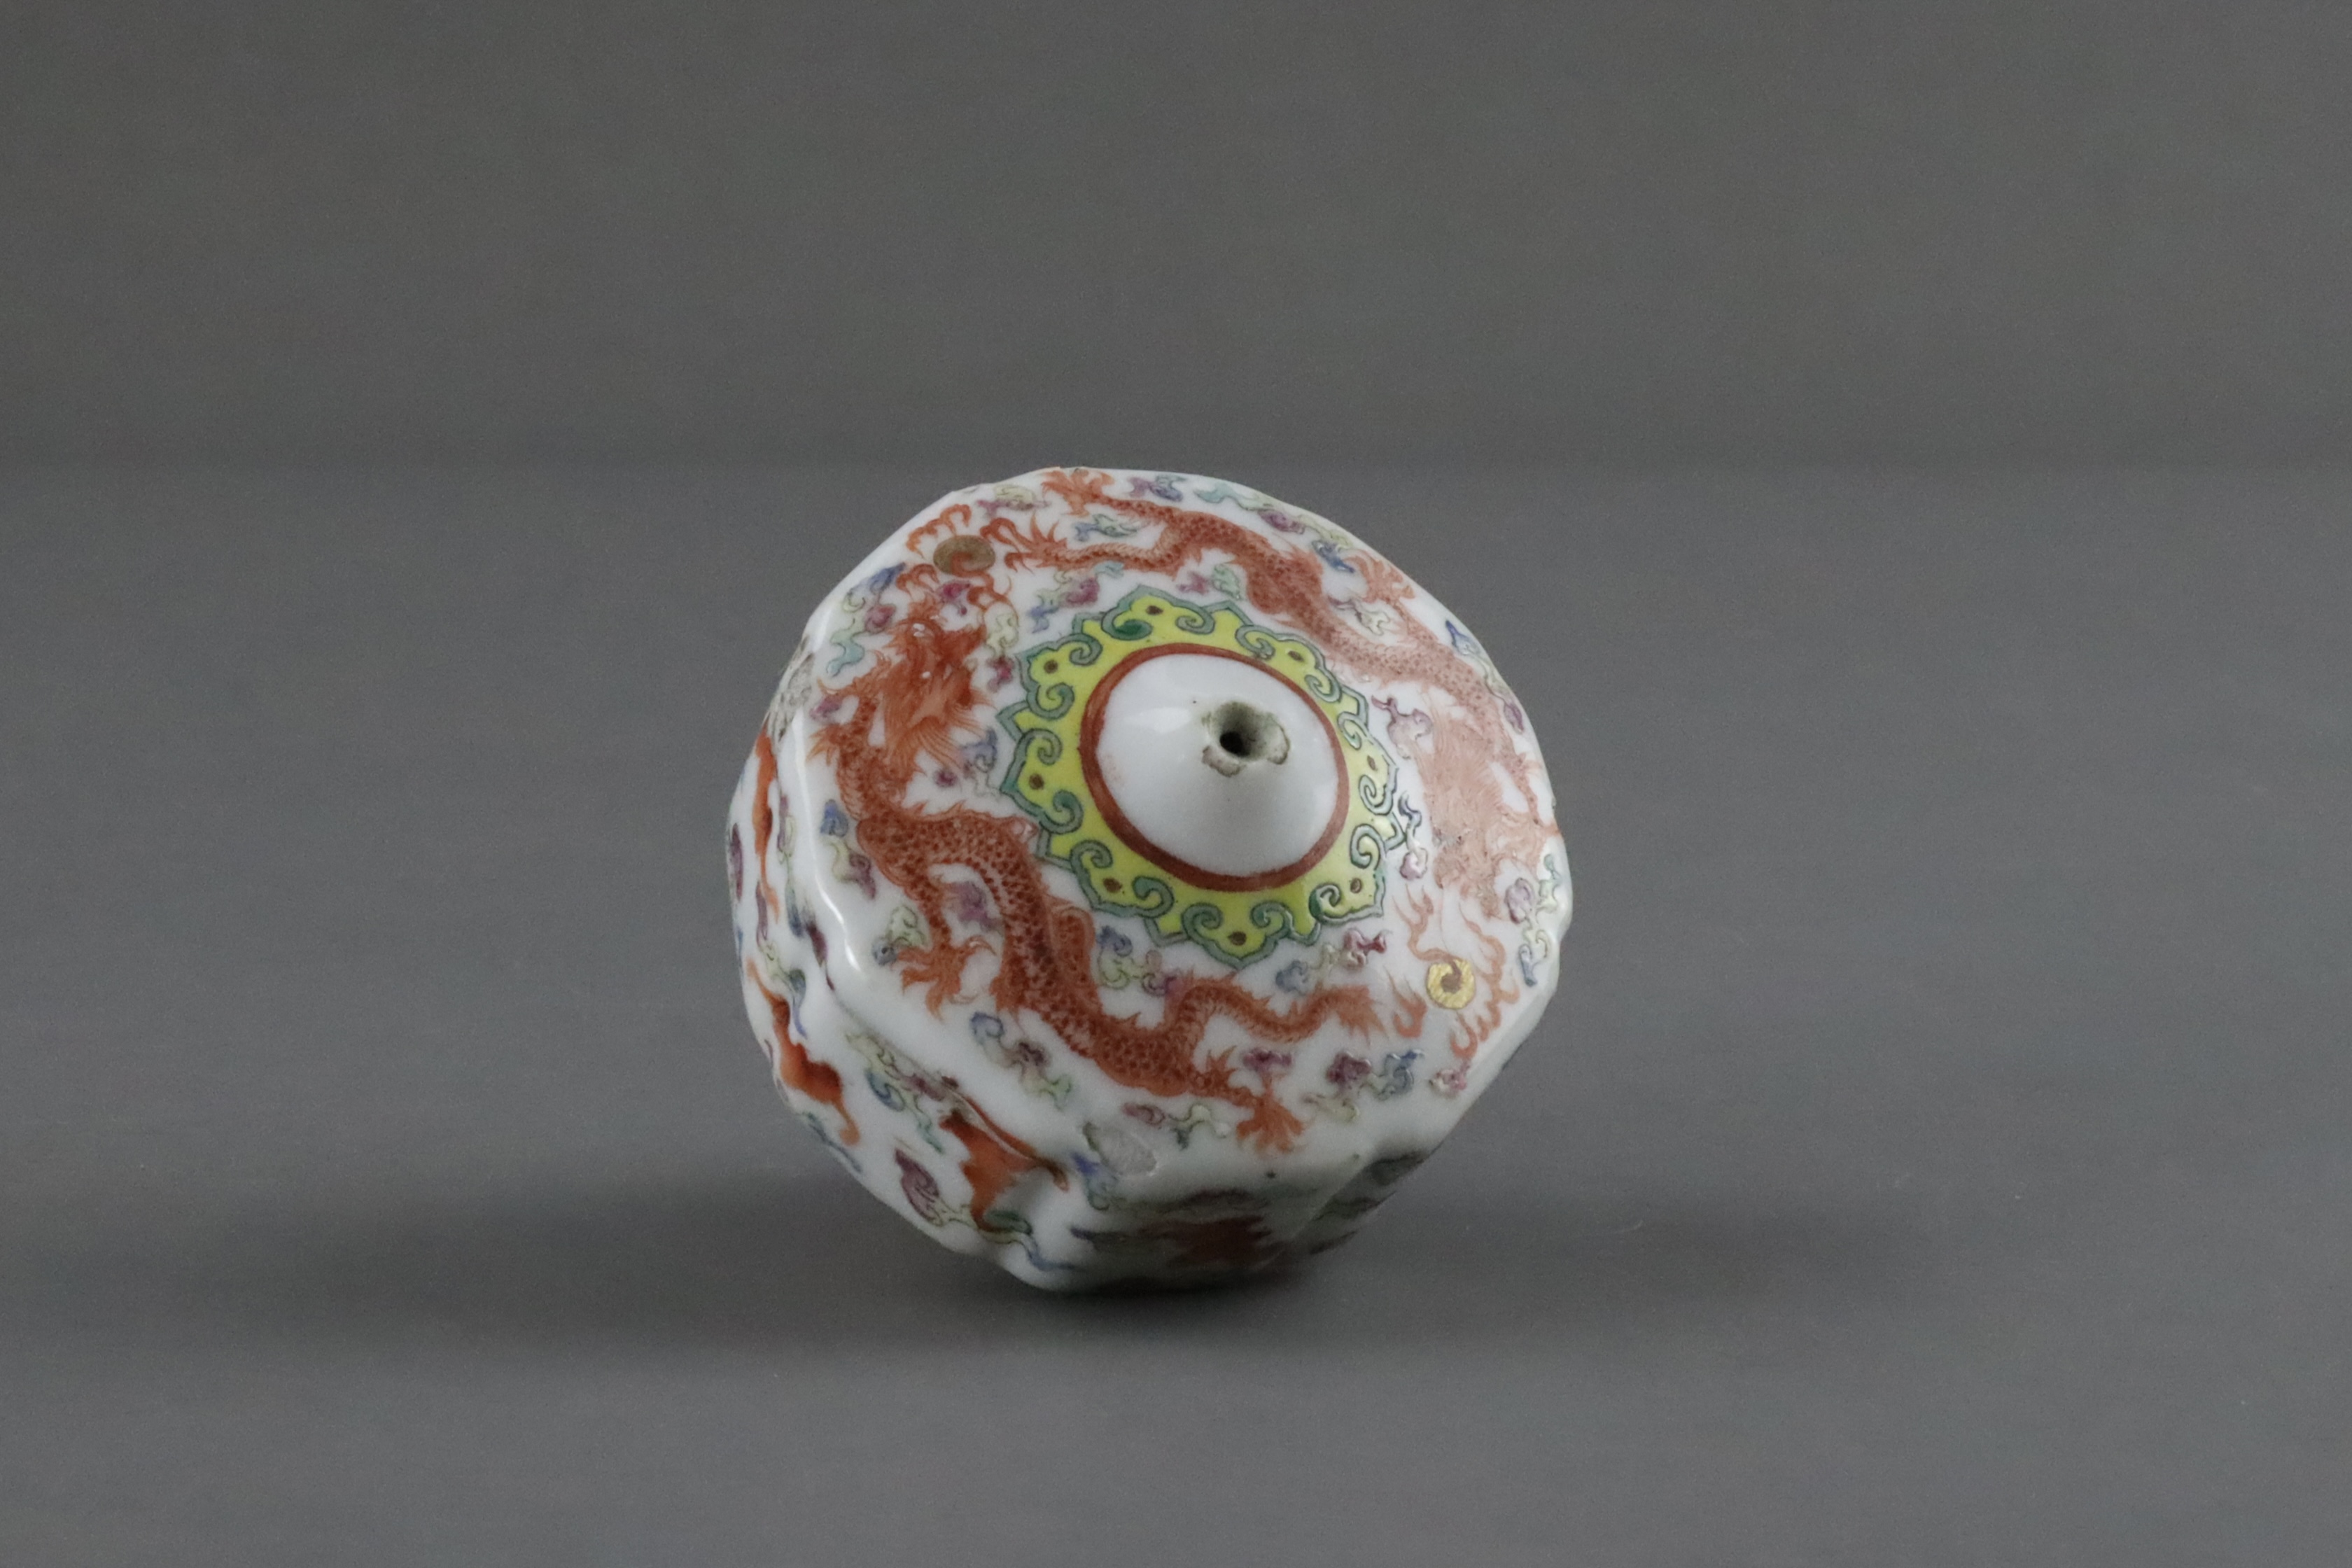 A Rare Porcelain Opium Pipe Bowl, four character mark, 19th century, - Image 3 of 8